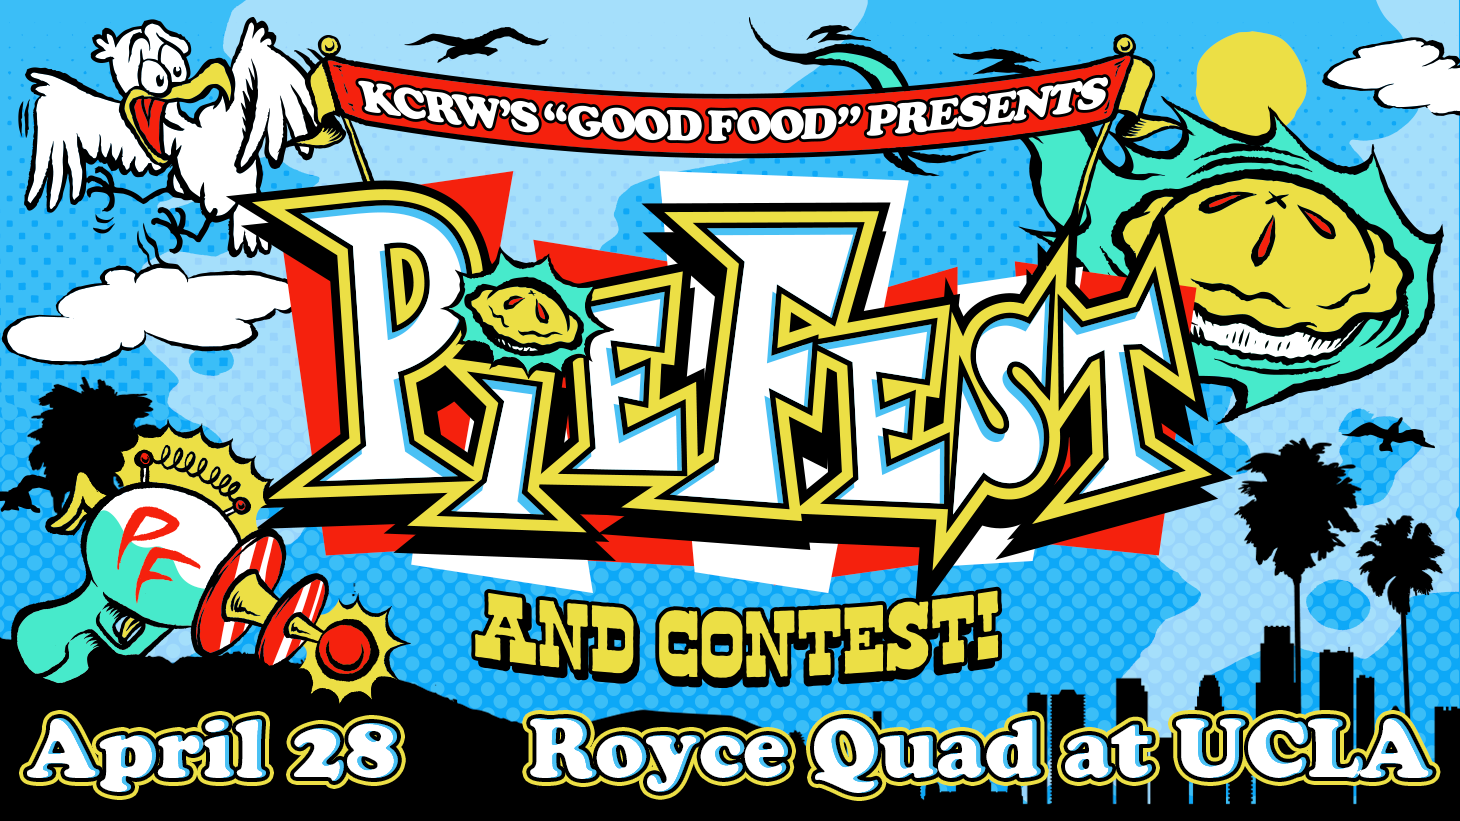 pie fest KCRW "good food" event that pi00a will pop up at